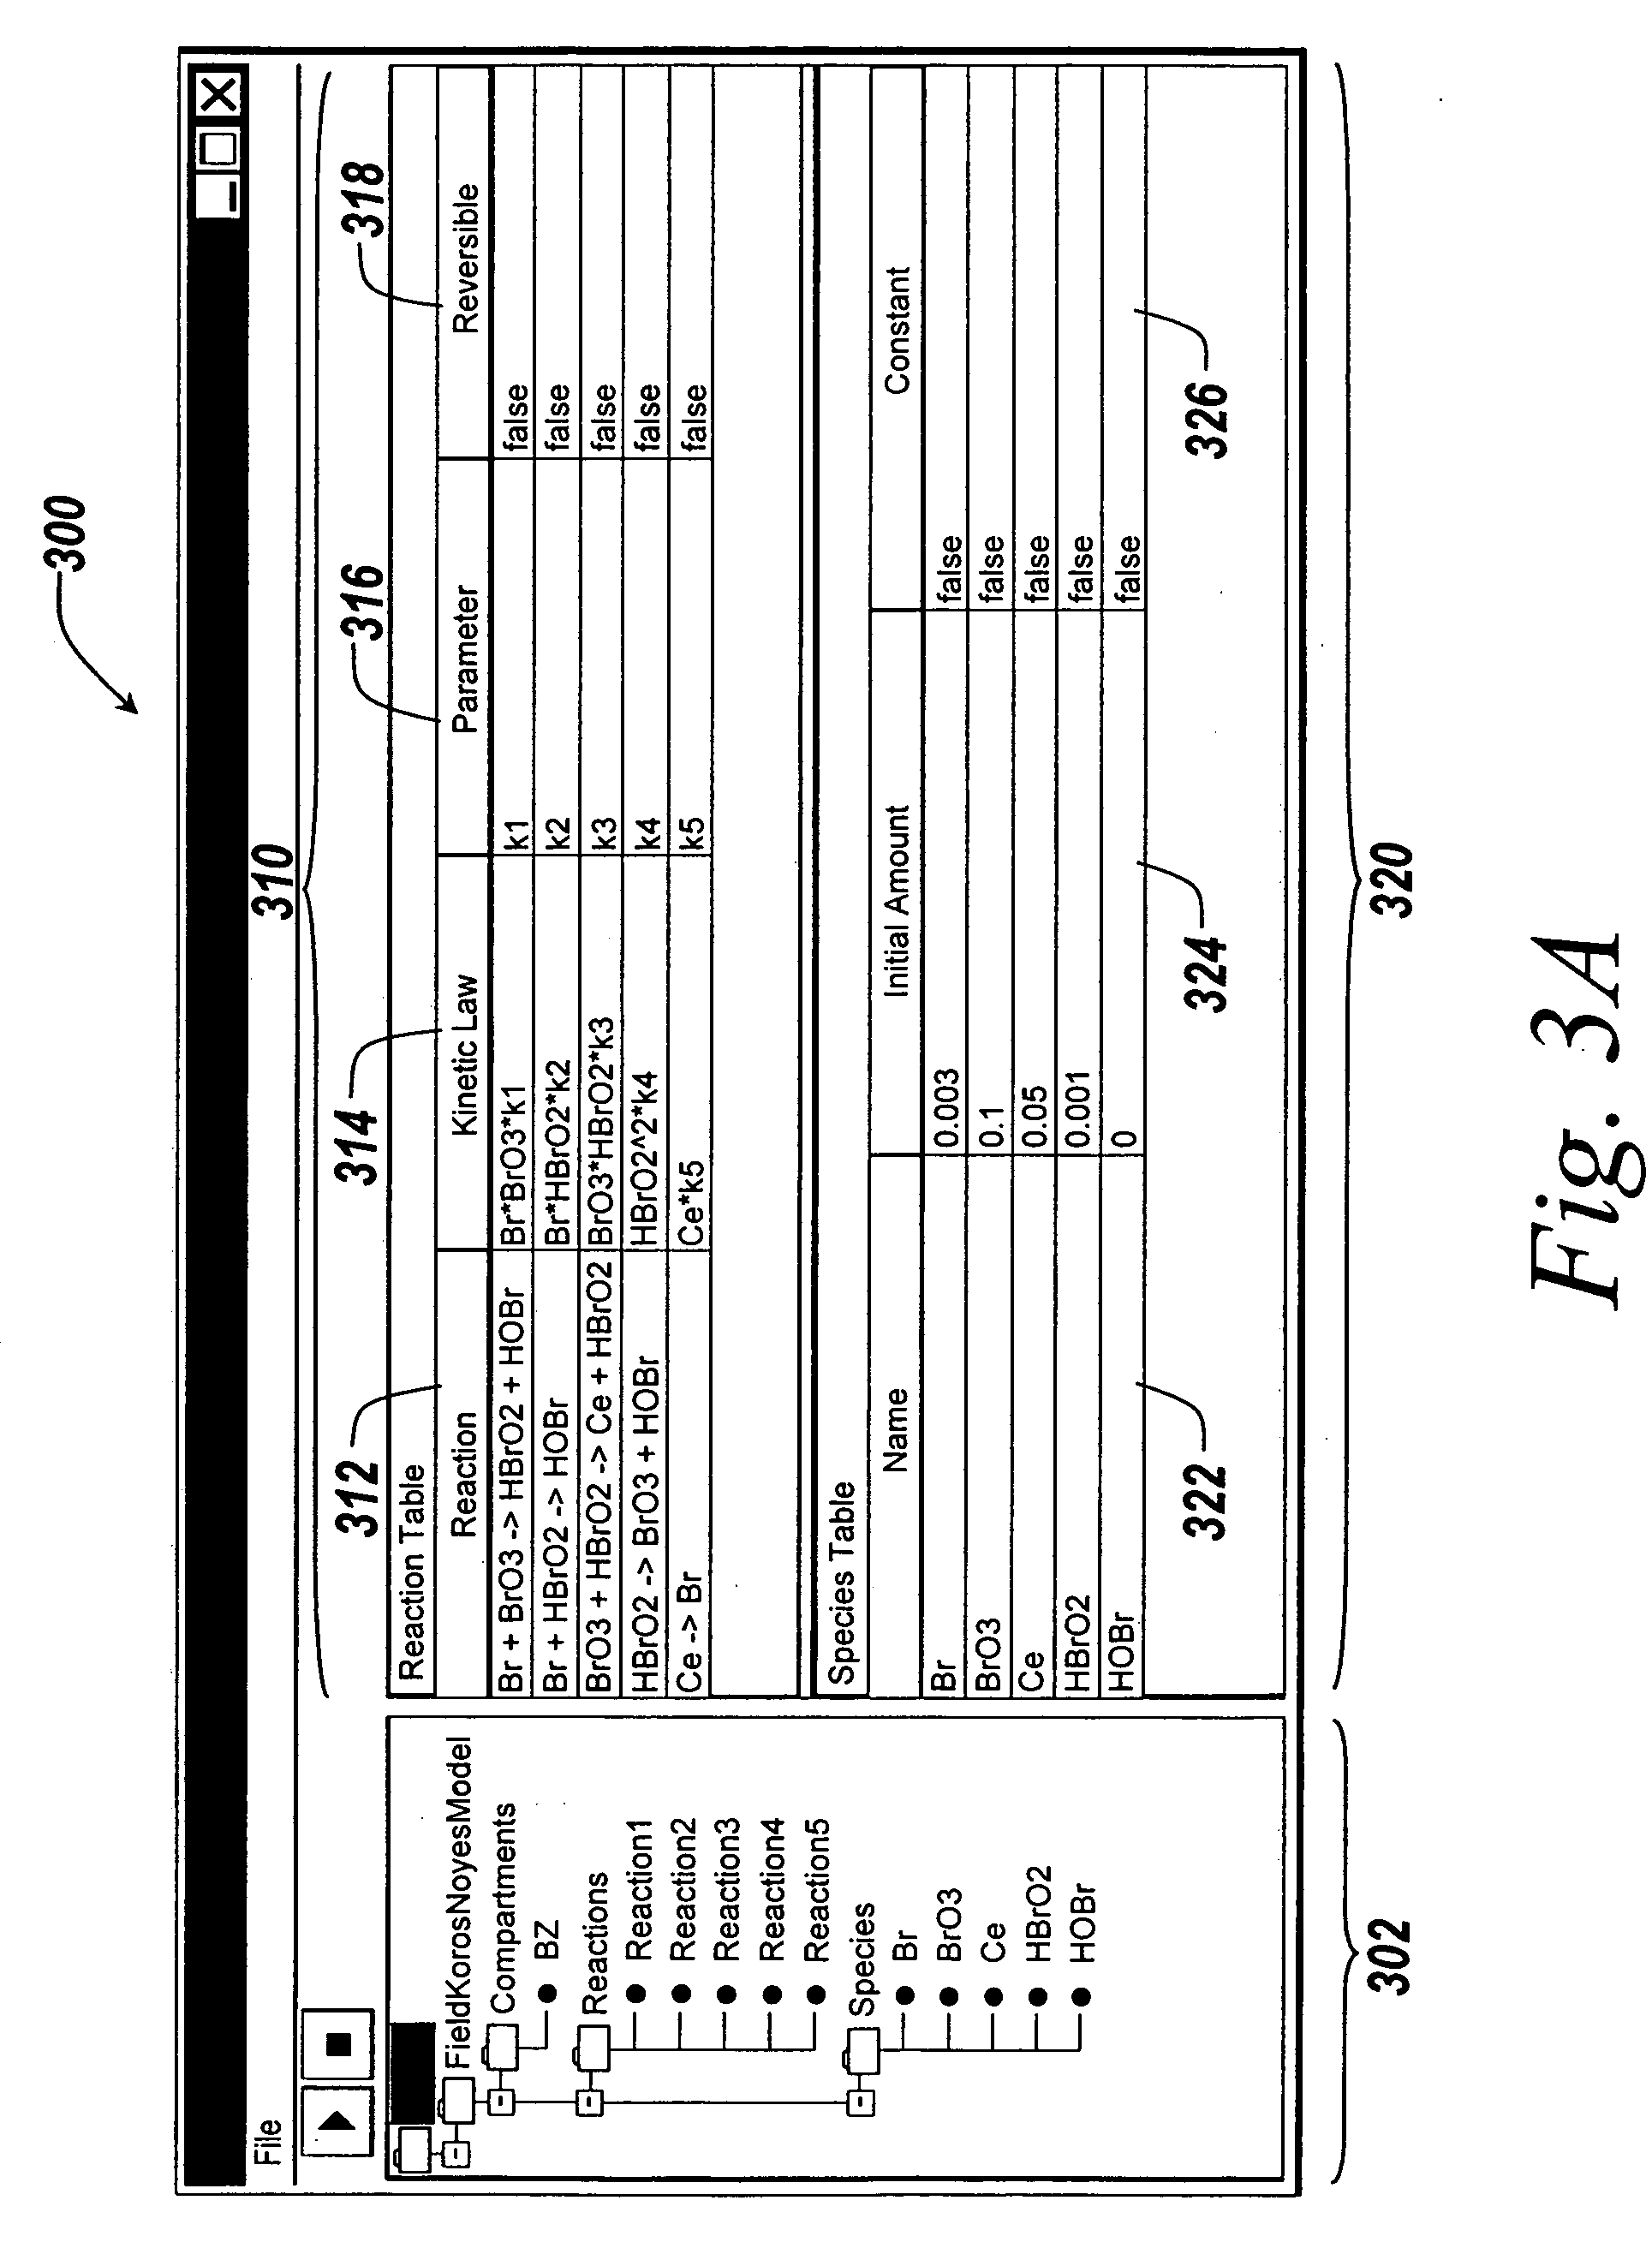 Method and apparatus for integrated modeling, simulation and analysis of chemical and biochemical reactions